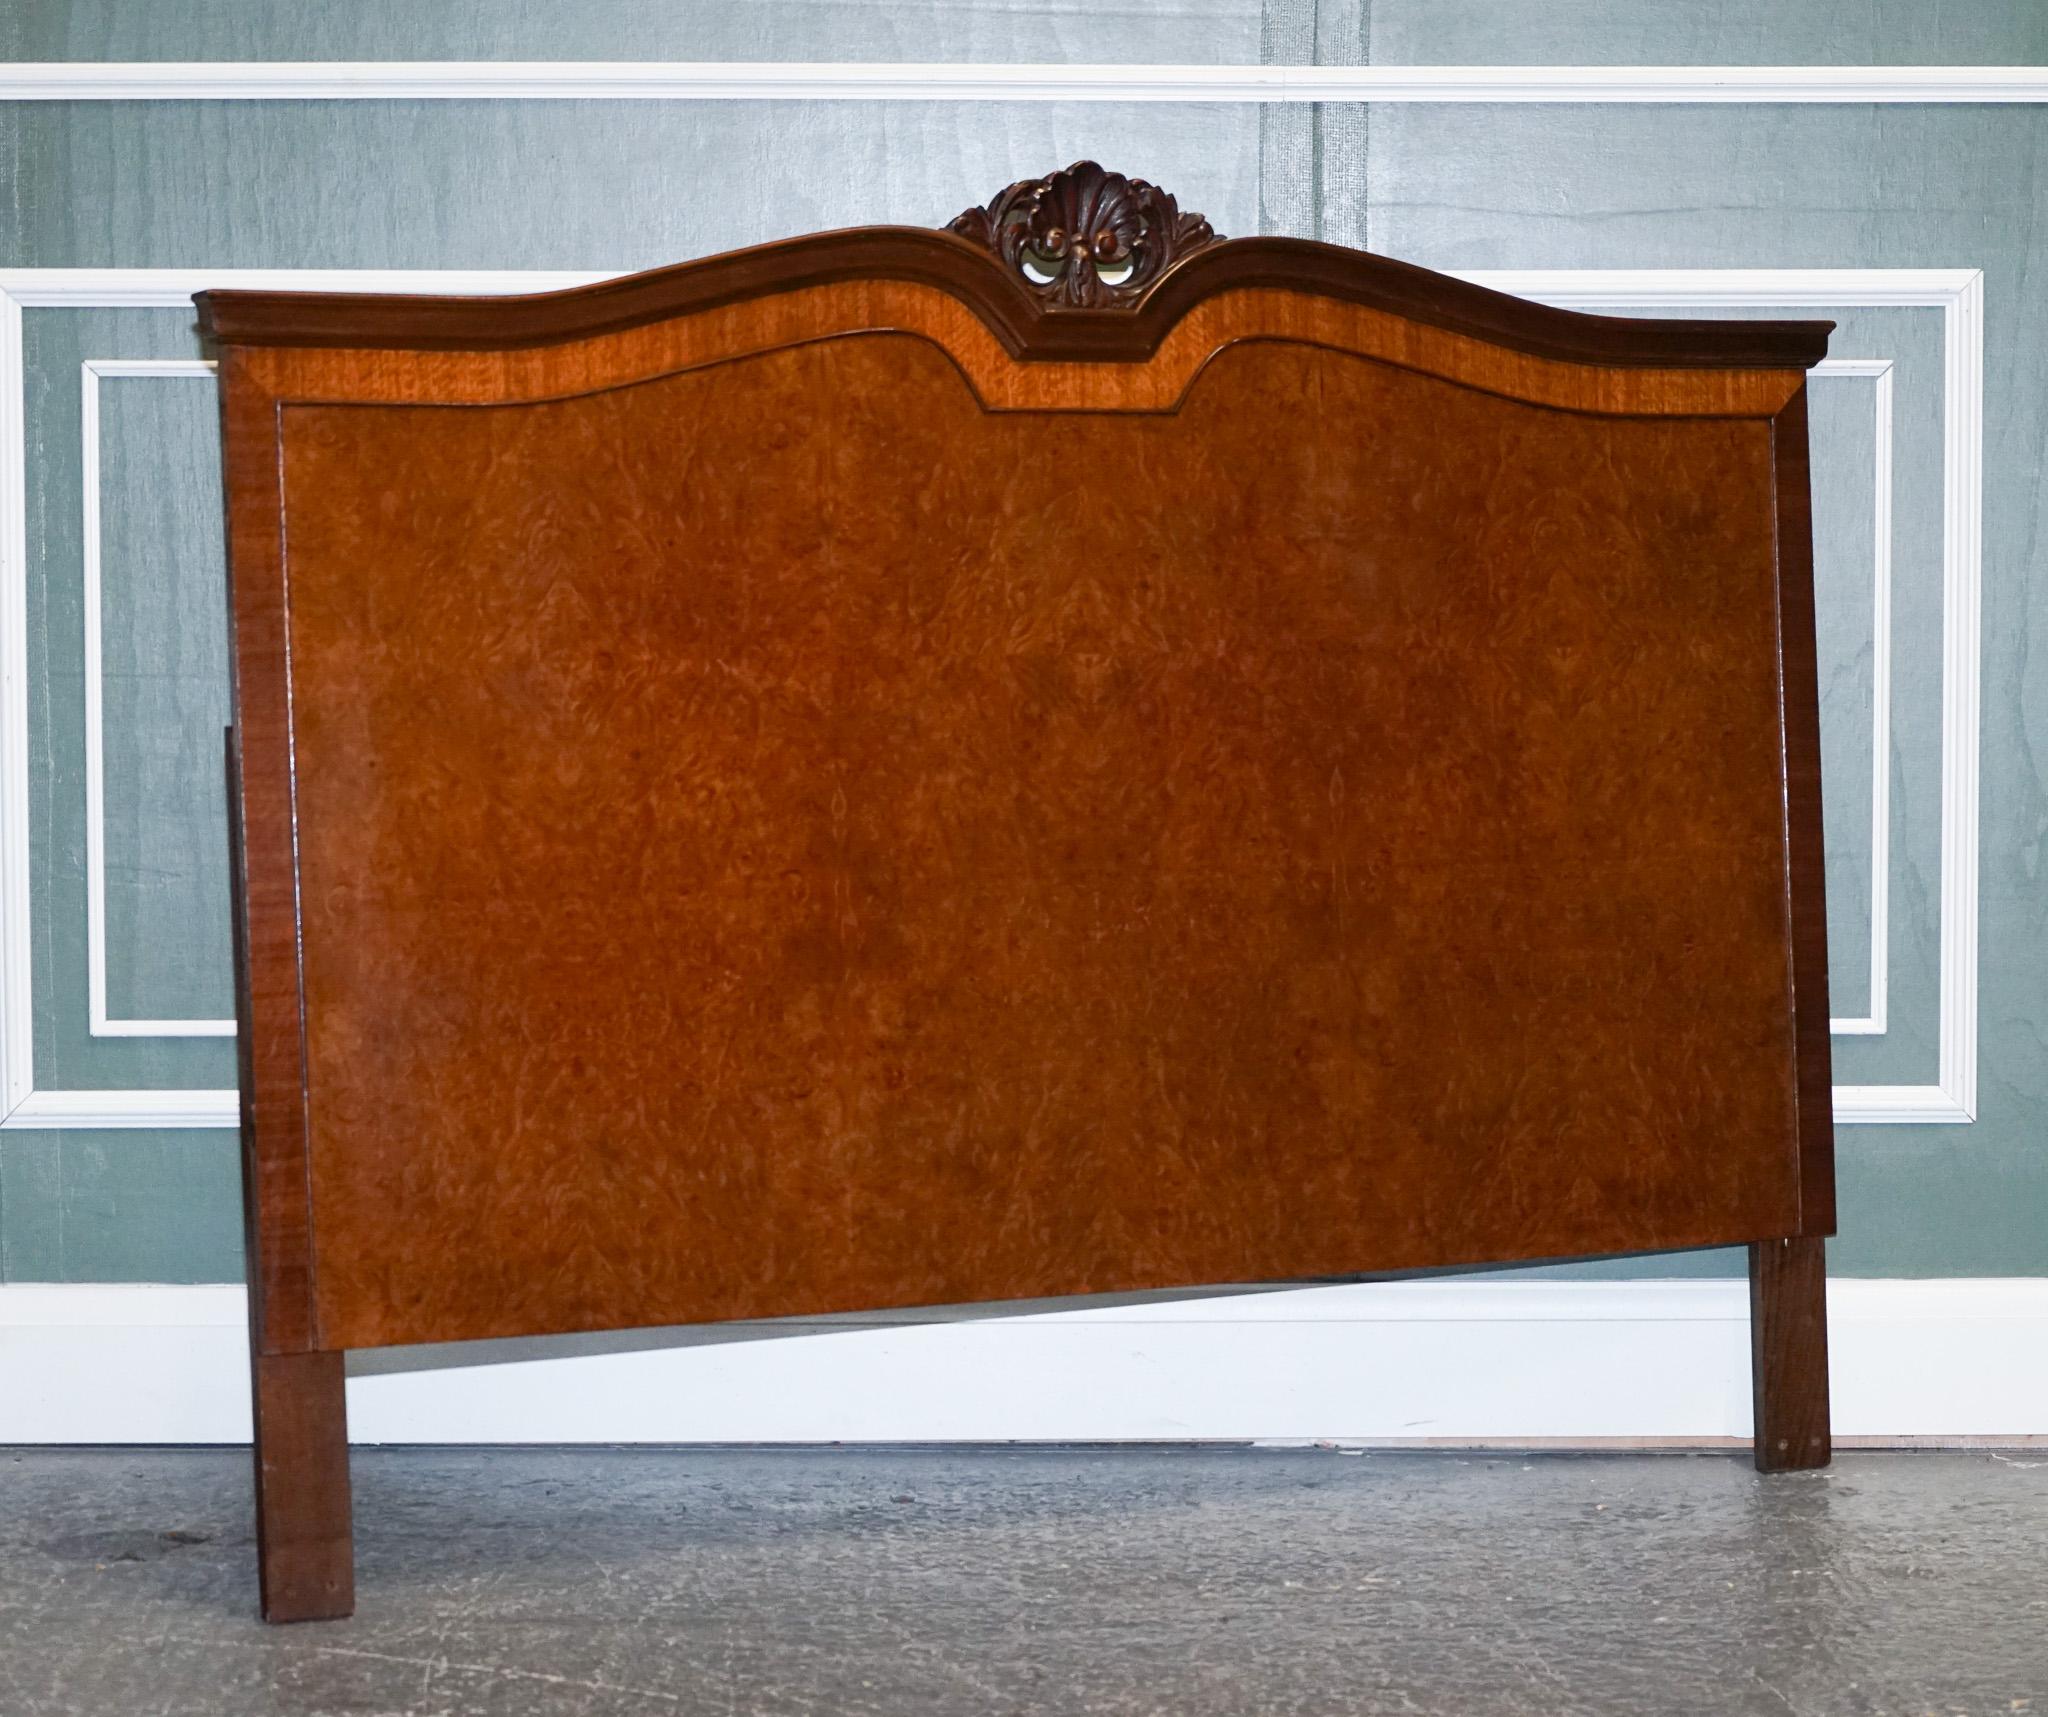 We are excited to present this lovely art deco burr walnut headboard.

Very lovely burr all over and a nicely carved ornate on top of the headboard.

We have cleaned, hand waxed and hand polished it.

Condition-wise, there will be some